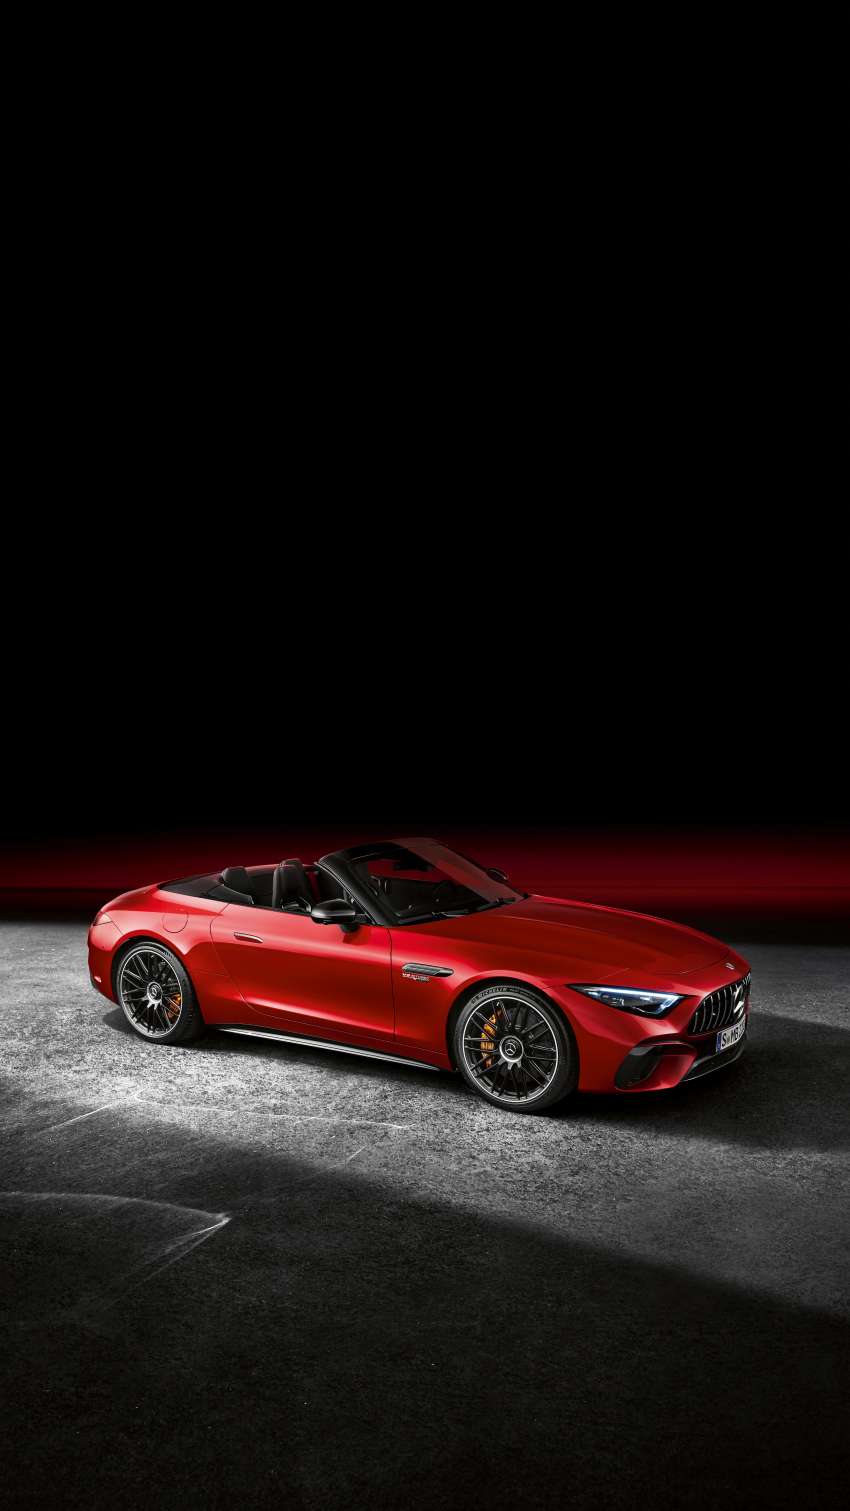 2022 Mercedes-AMG SL revealed – R232 developed by Affalterbach, 476 PS SL55, 585 PS SL63, PHEV later Image #1369251